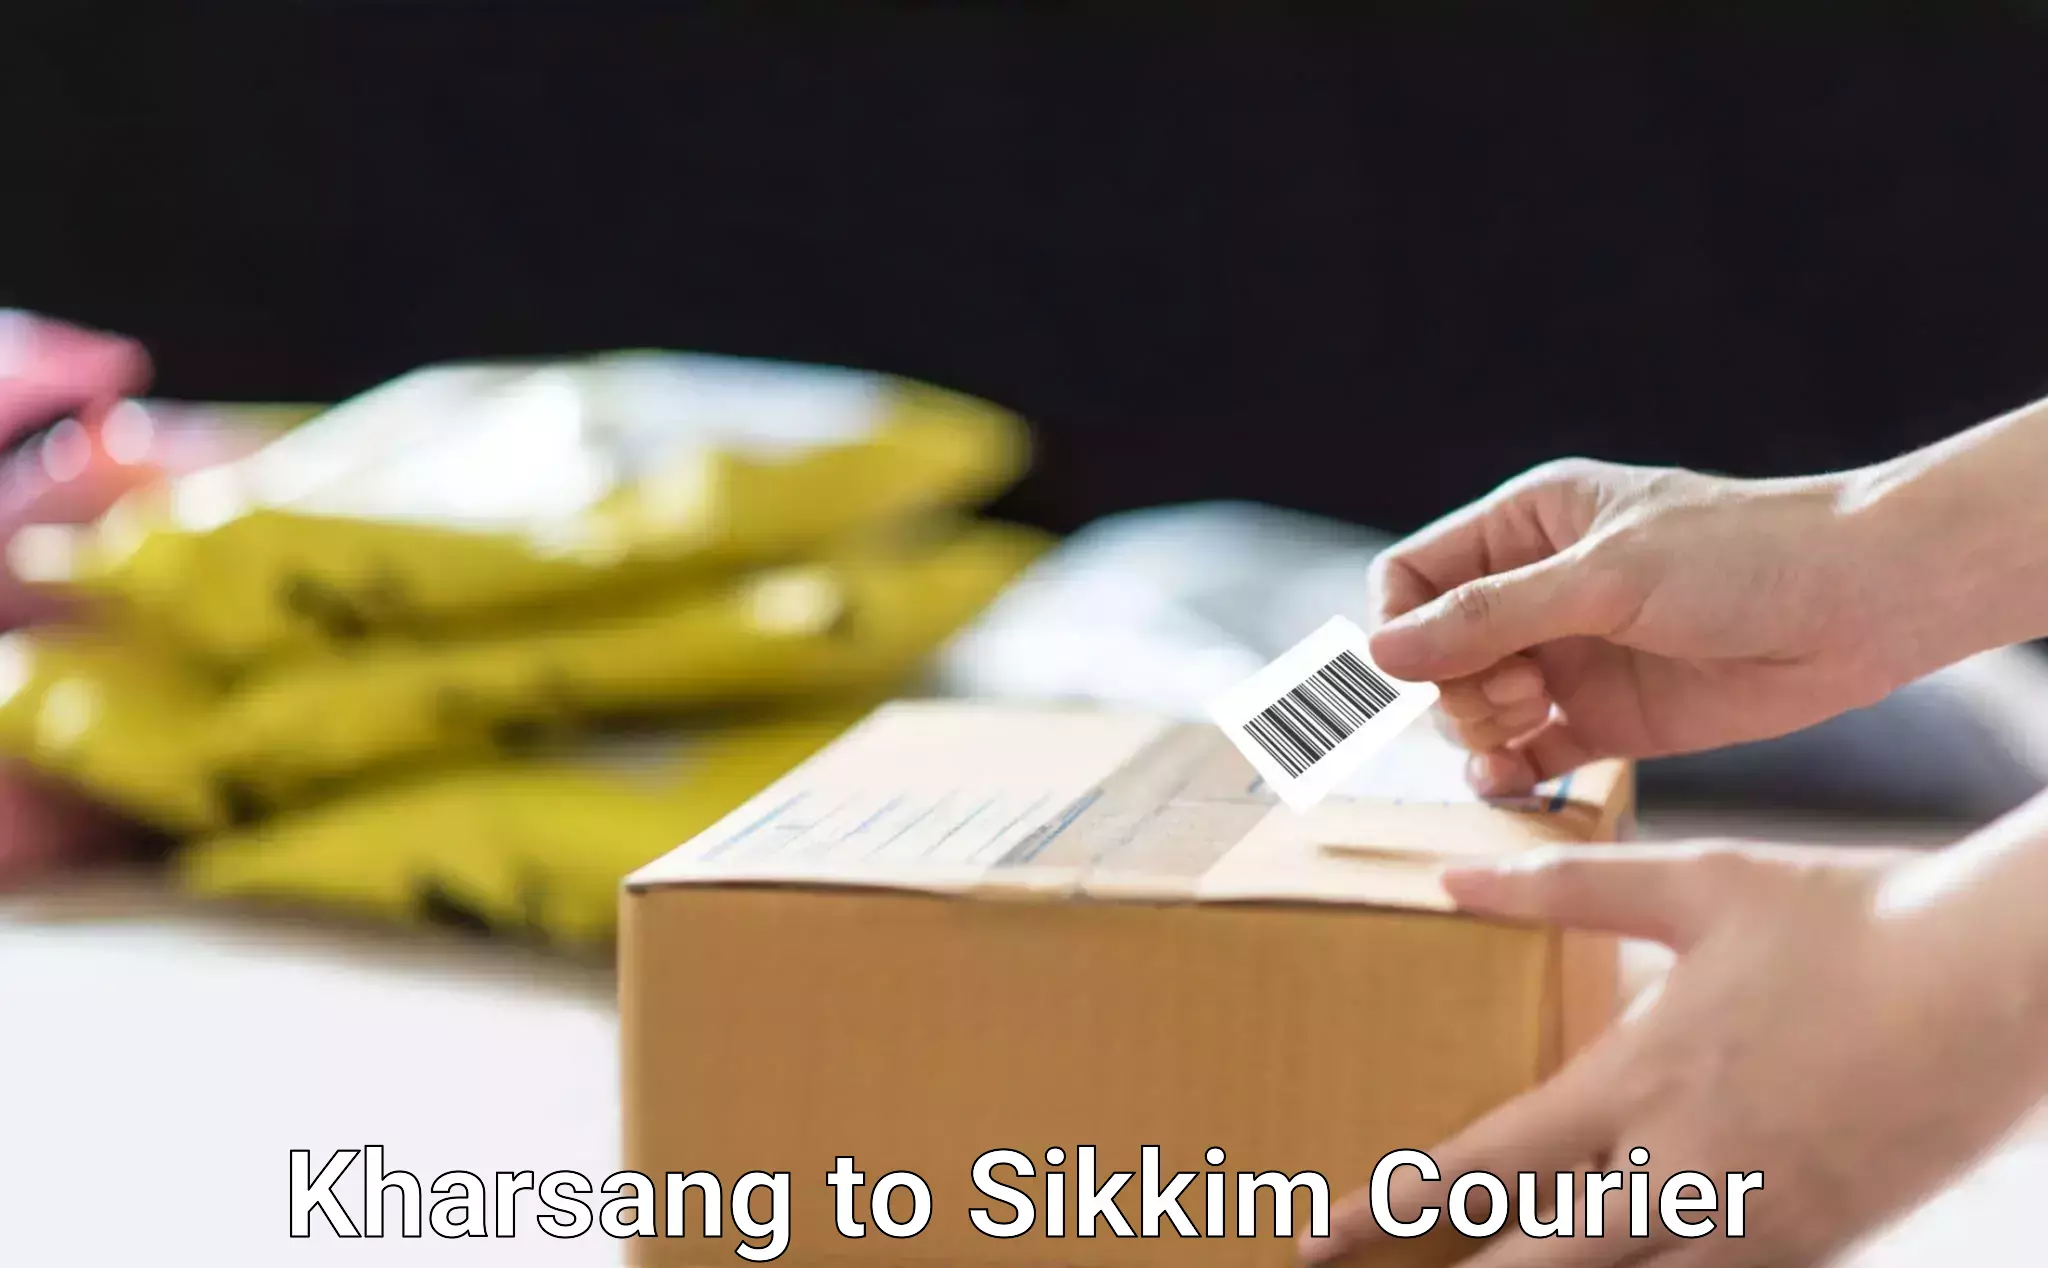 Sustainable shipping practices Kharsang to Sikkim